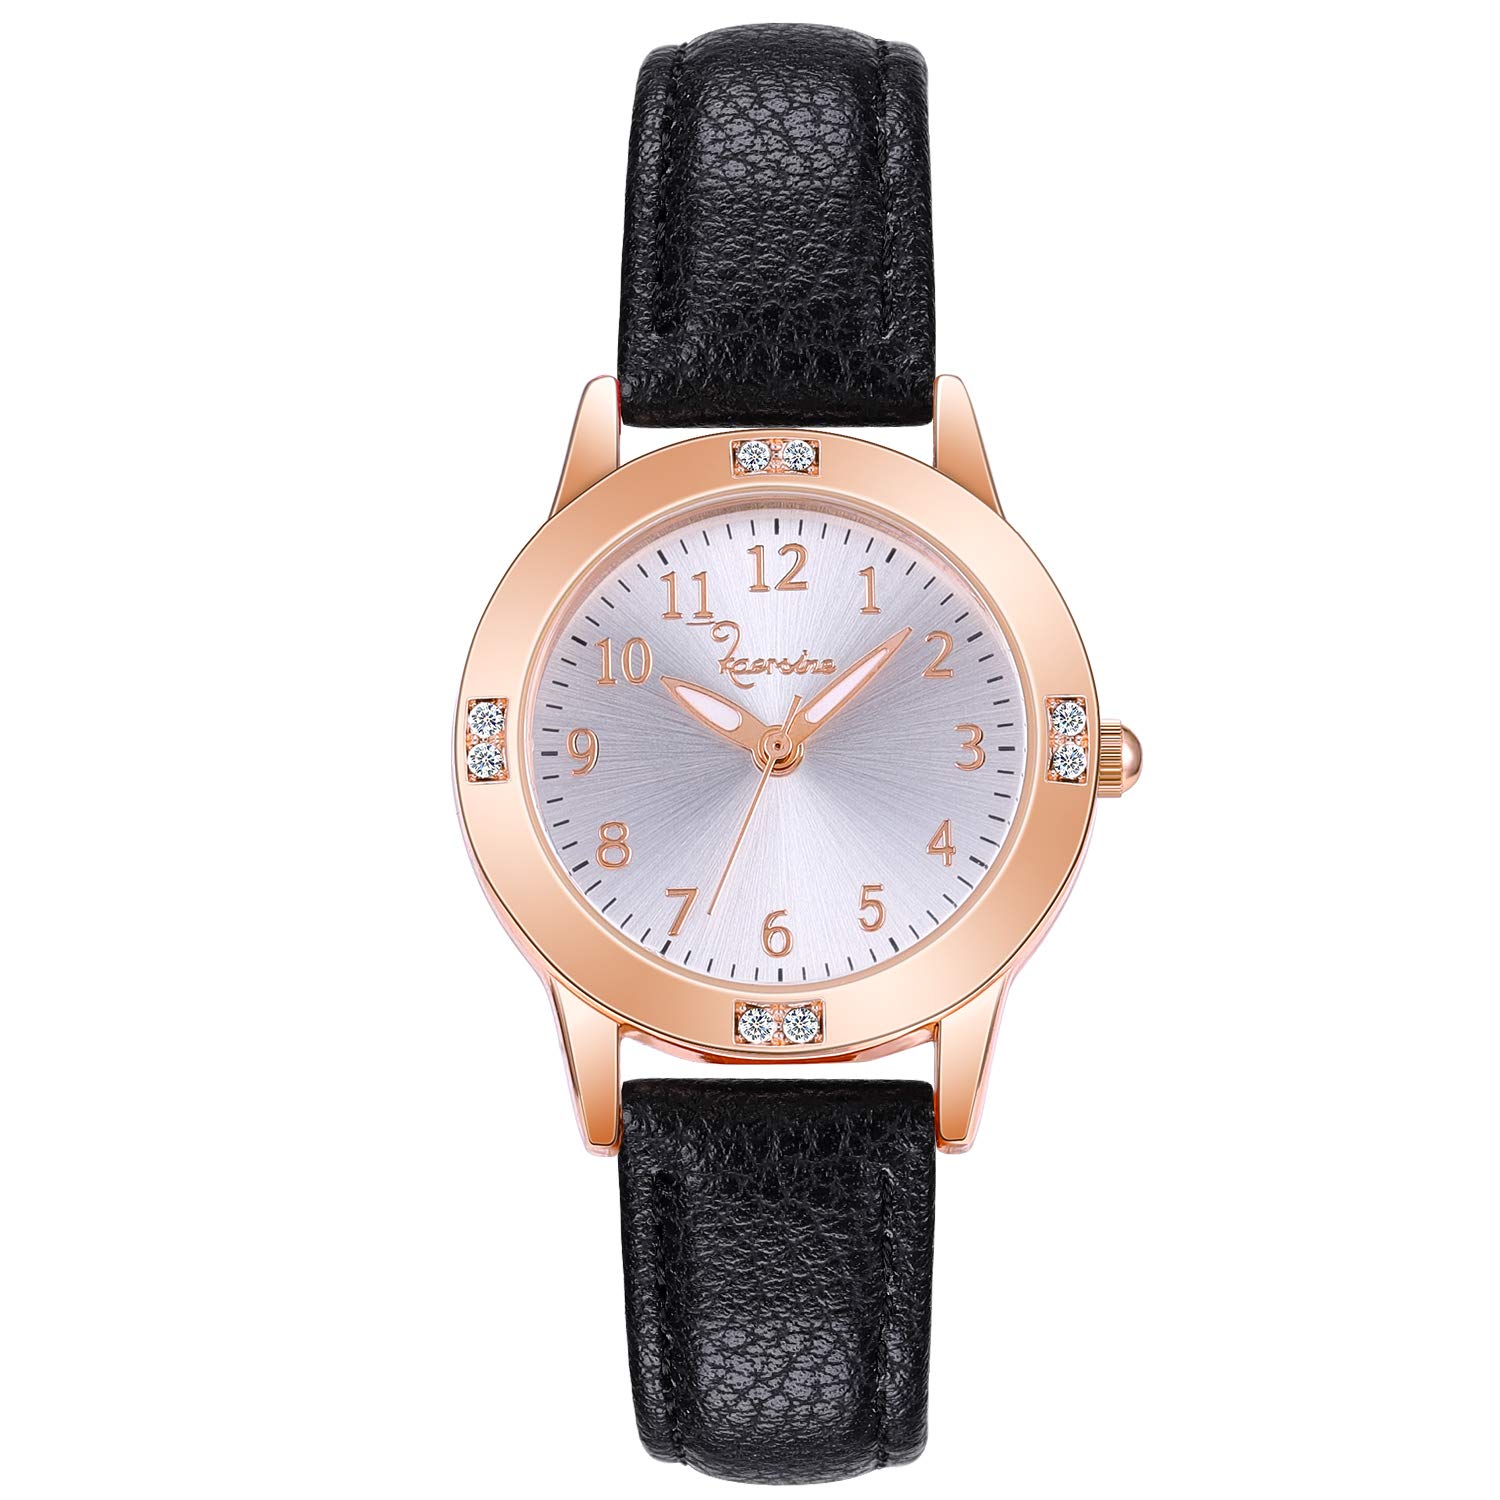 Girls Watches Ladies Watch for Gift Students Watches Simple Japanese Movement Casual Leather Band Watches for Ladies Fashion